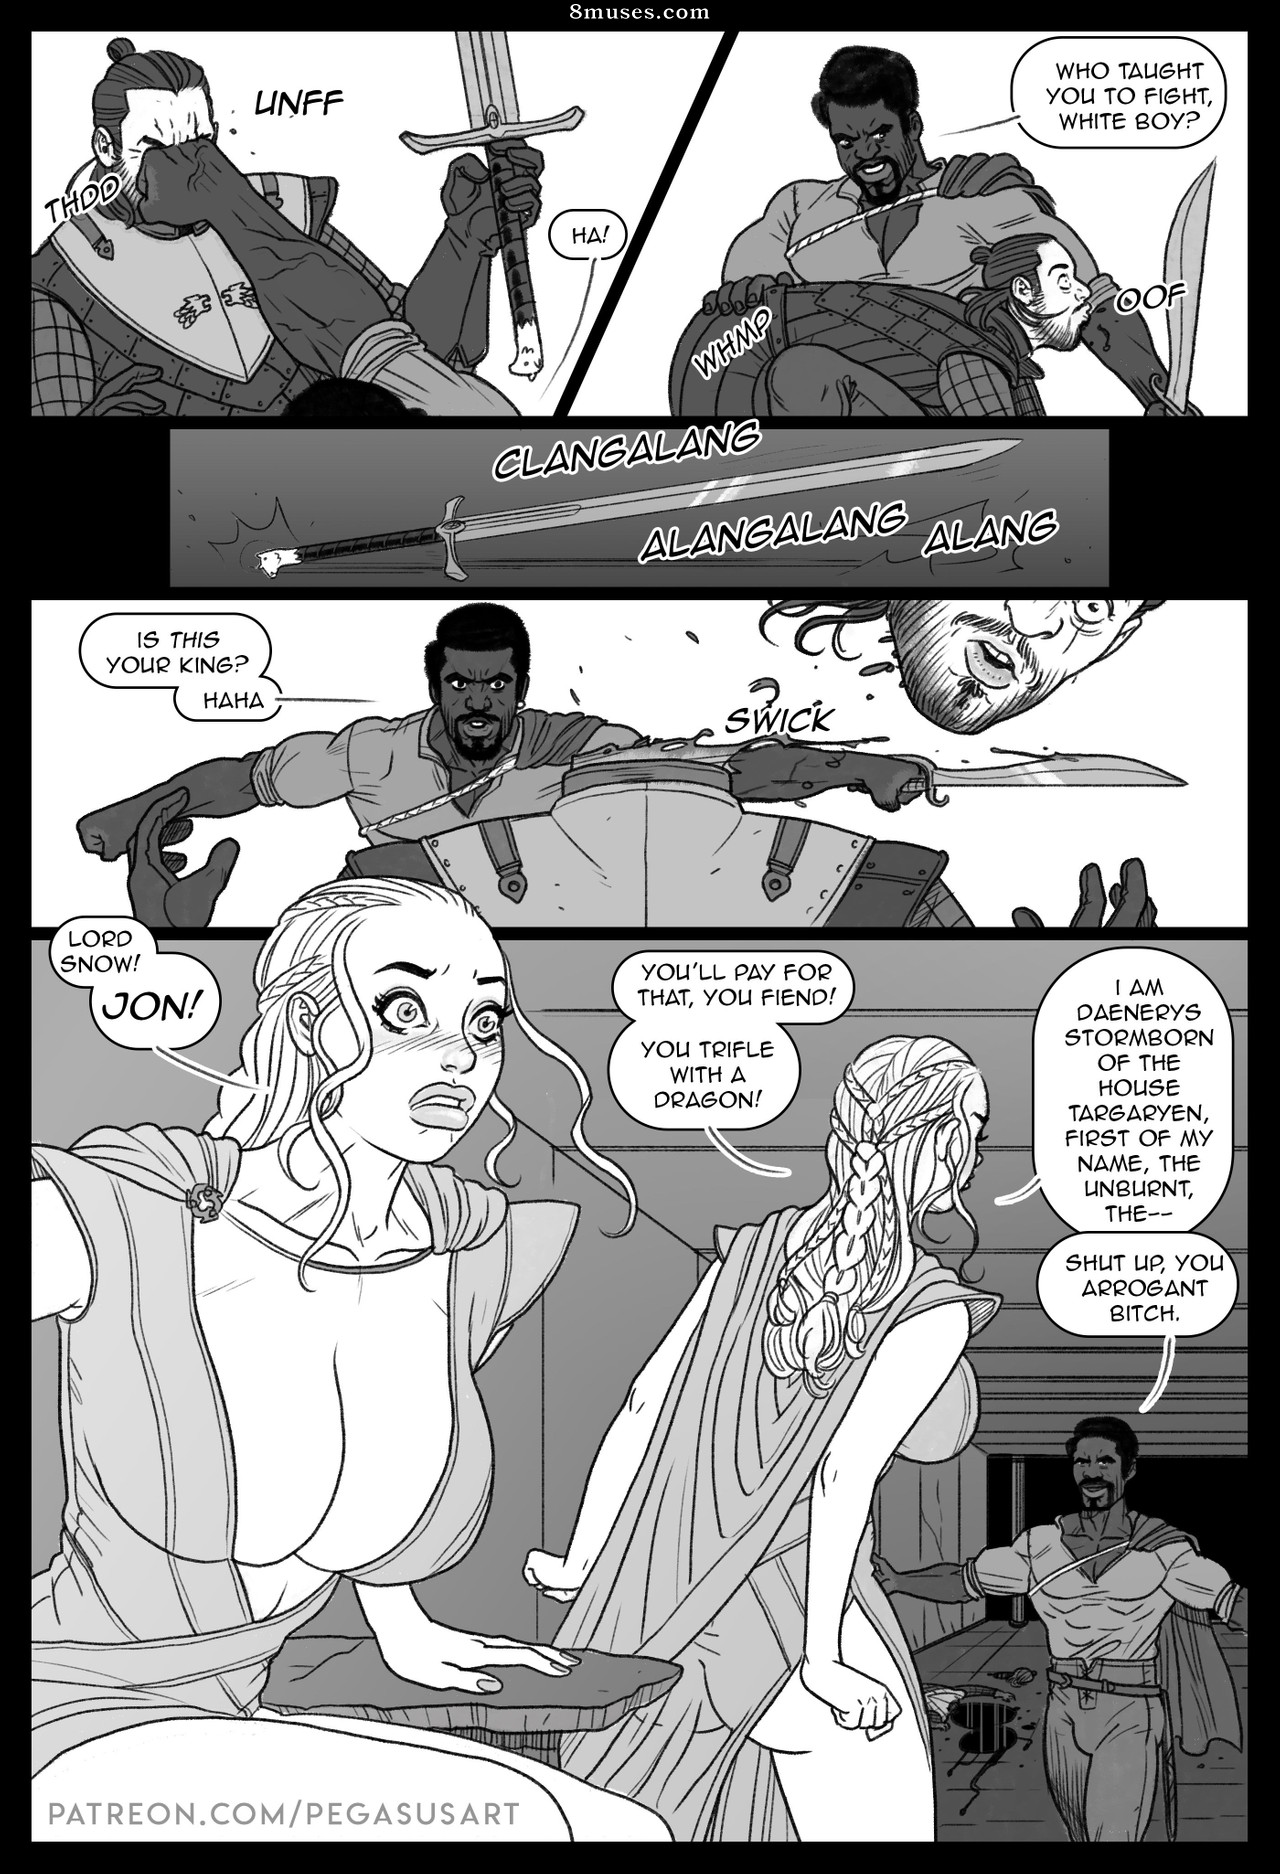 Cartoon Sex Game Of Thrones - Game of Thrones - BLACKED 1 - Daenerys Dominated Issue 1 - 8muses Comics - Sex  Comics and Porn Cartoons